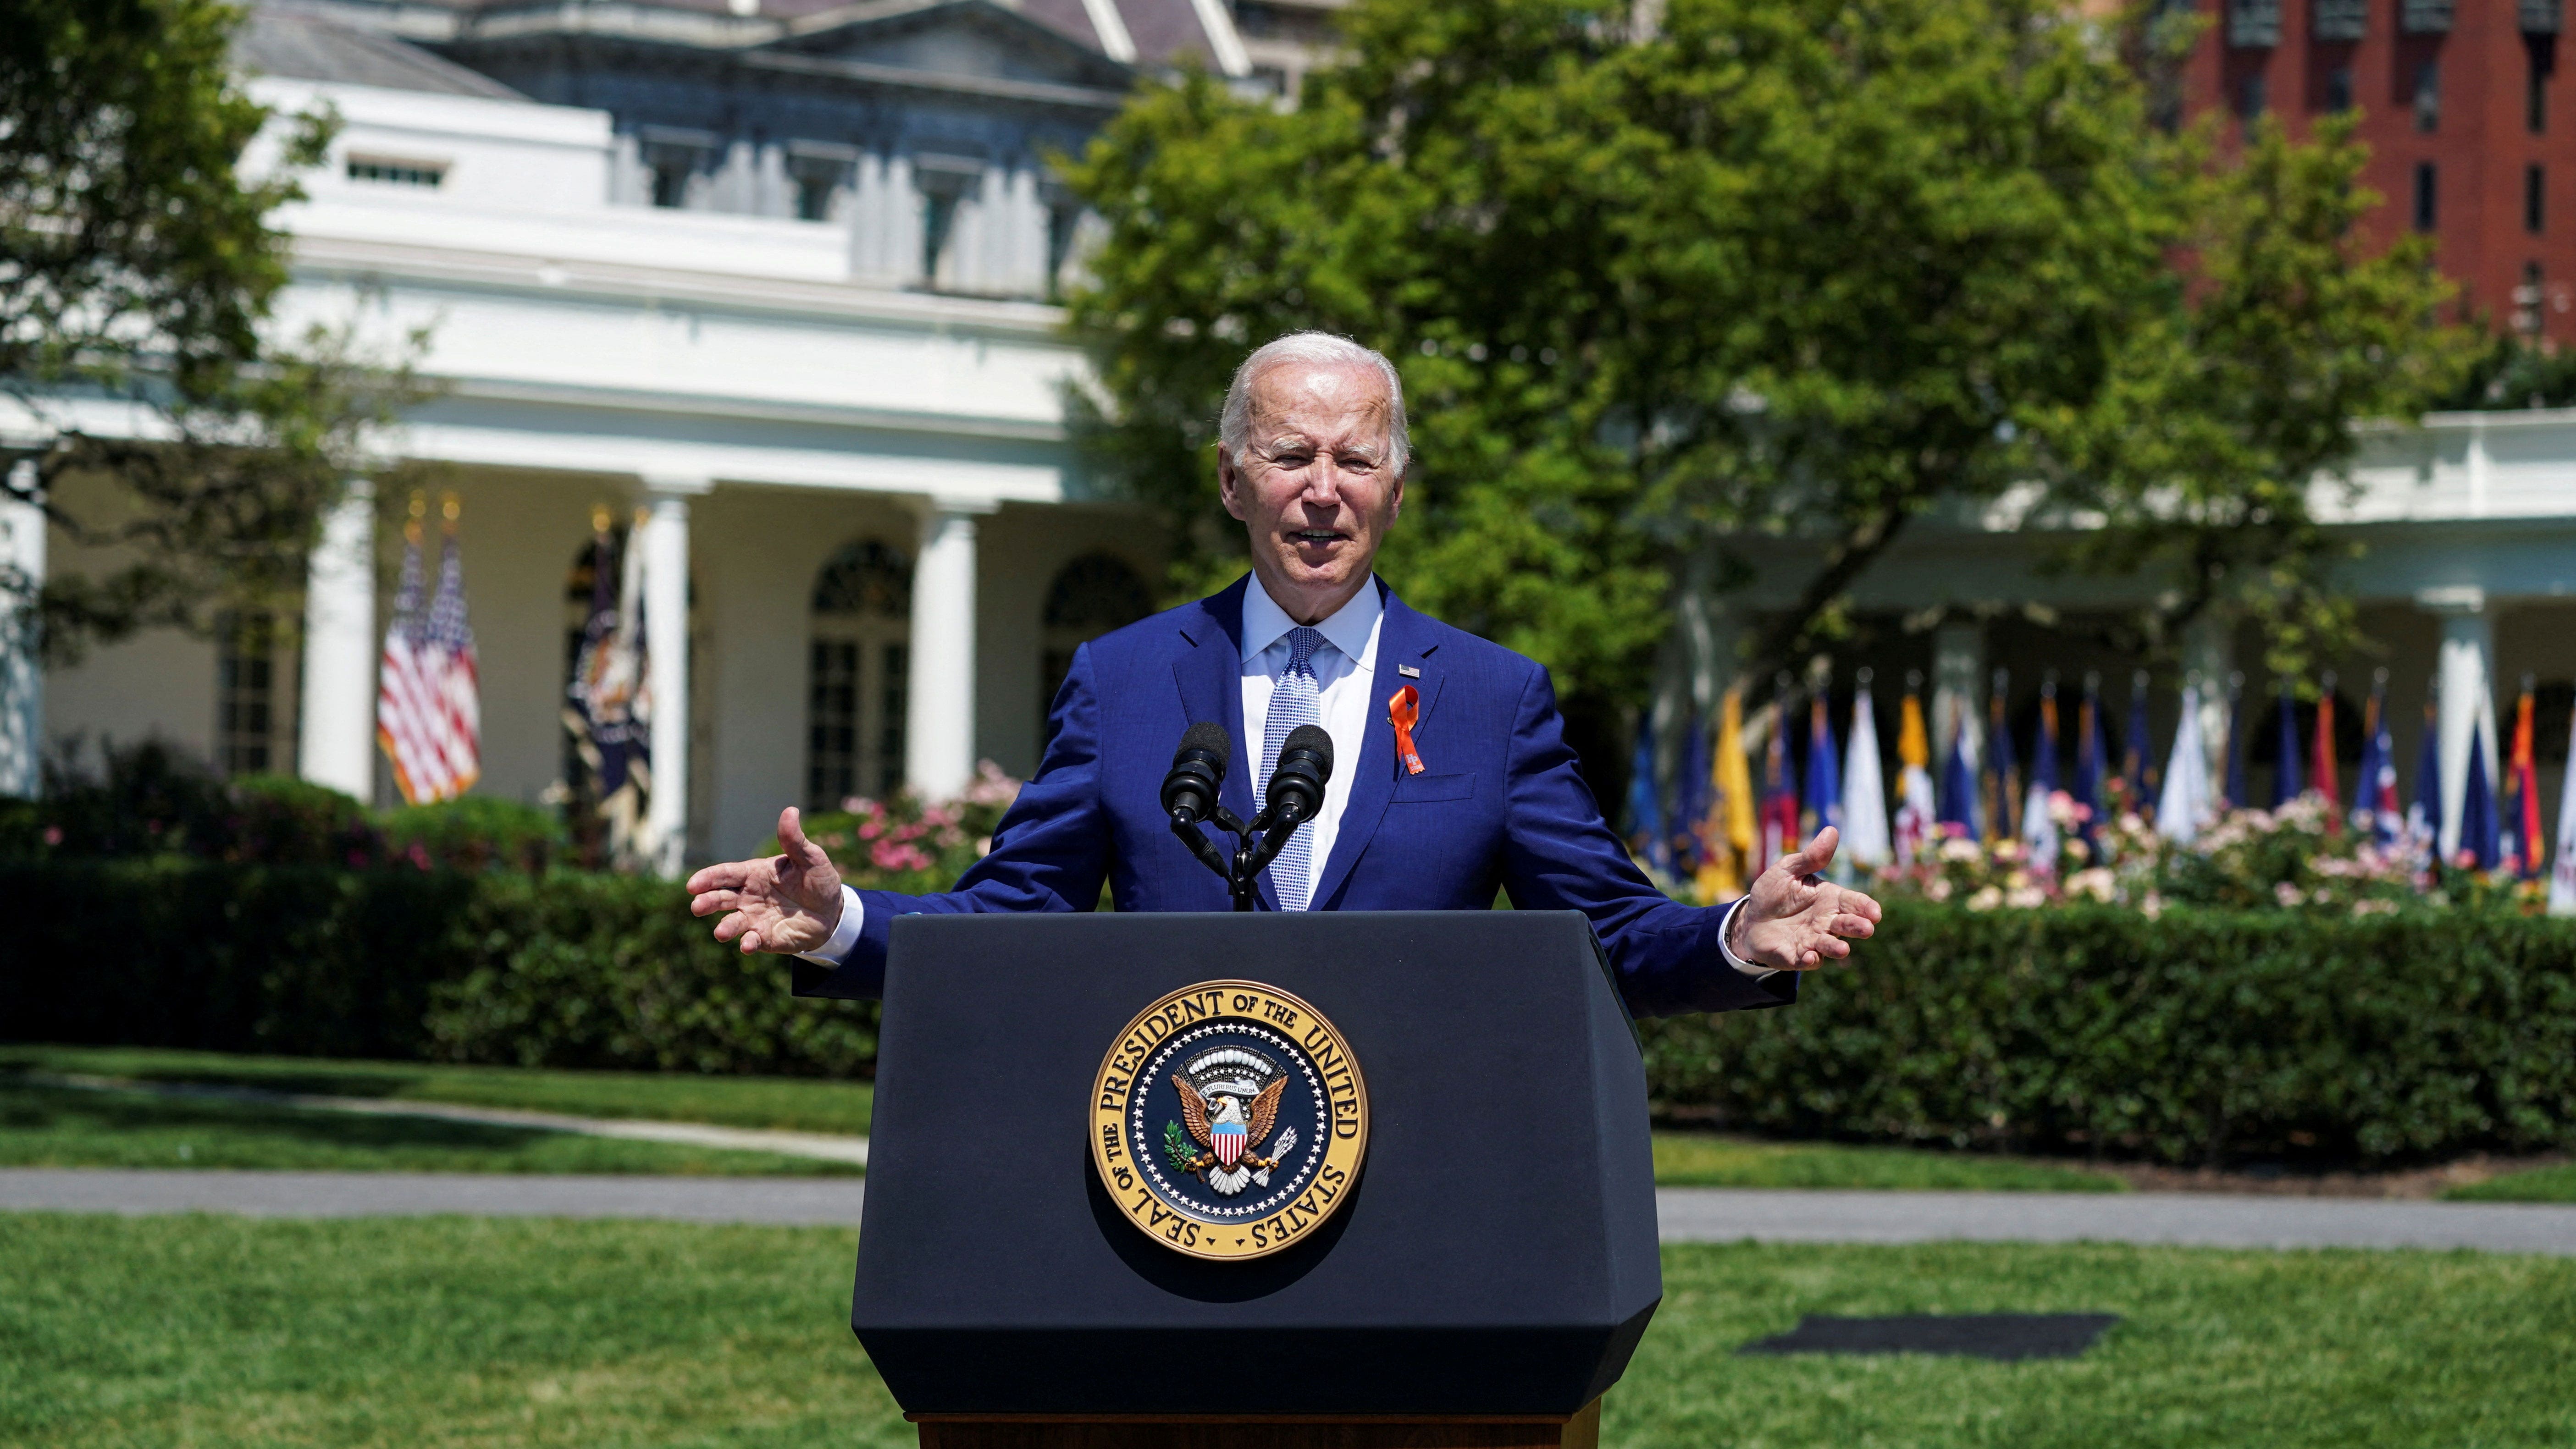 Biden stresses importance of COVID vaccination after testing negative - Fox News